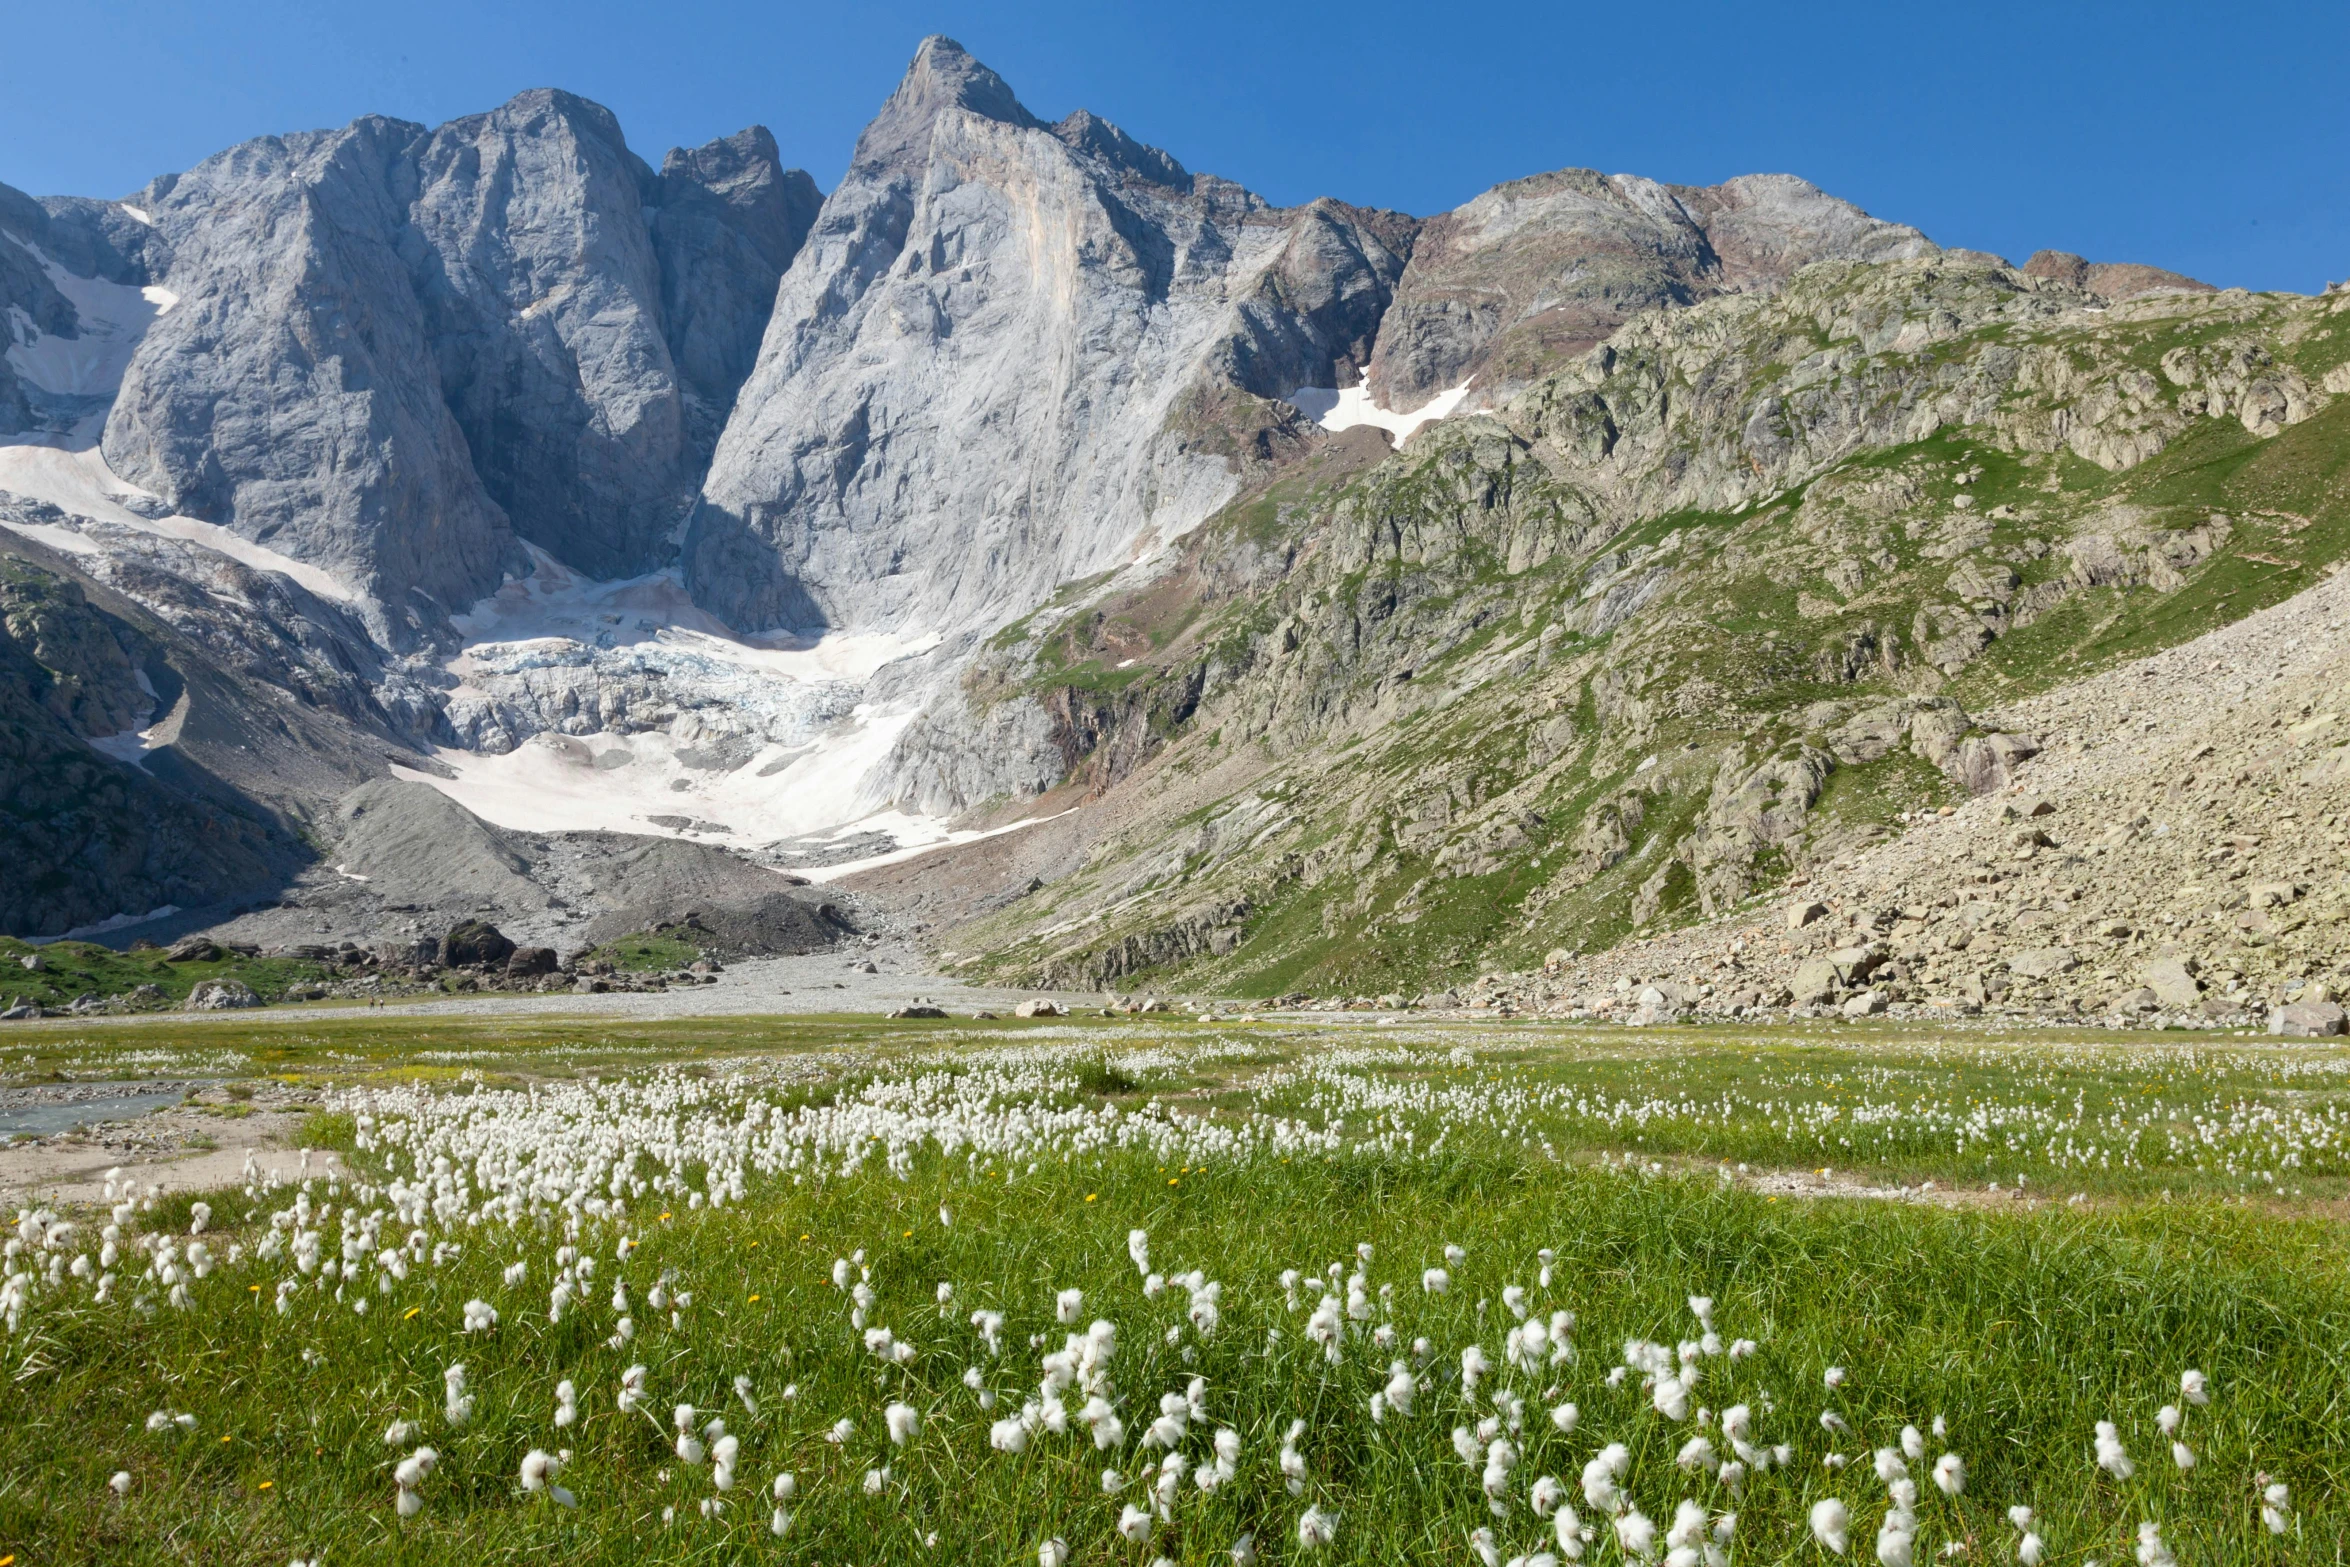 the mountain range with flowers in the foreground